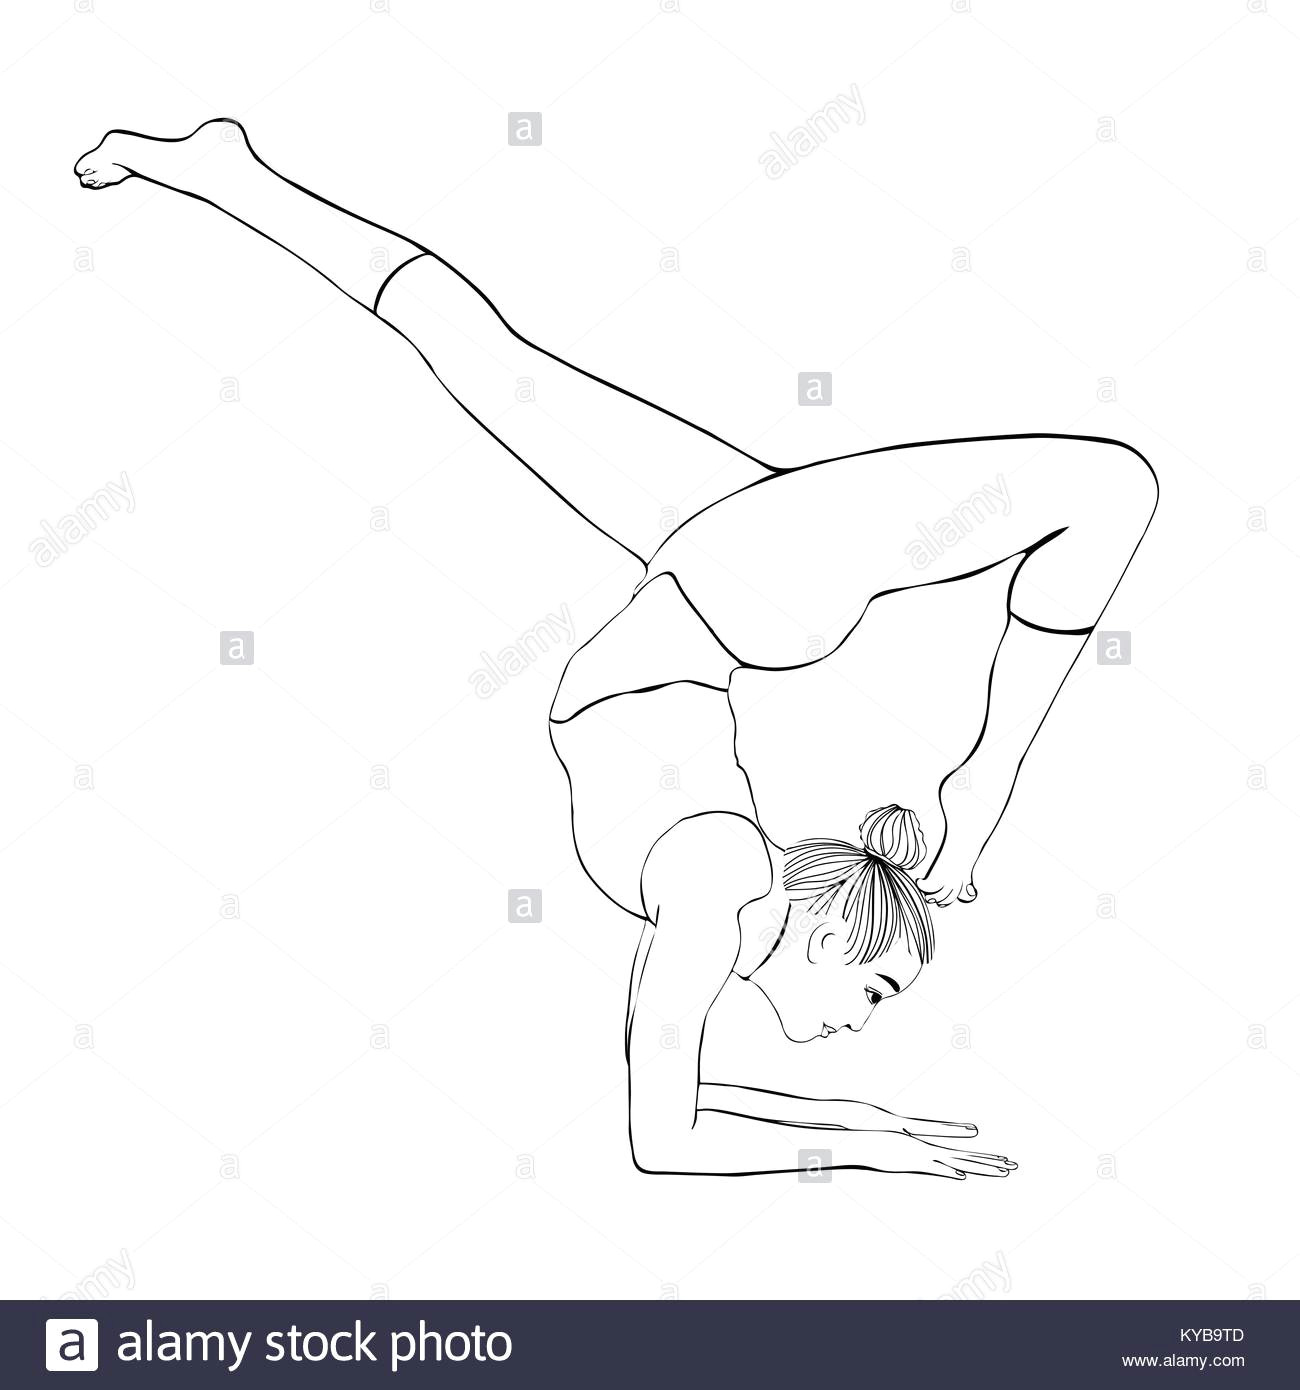 Drawing Of A Girl Doing A Handstand Indian Woman Silhouette Black and White Stock Photos Images Alamy